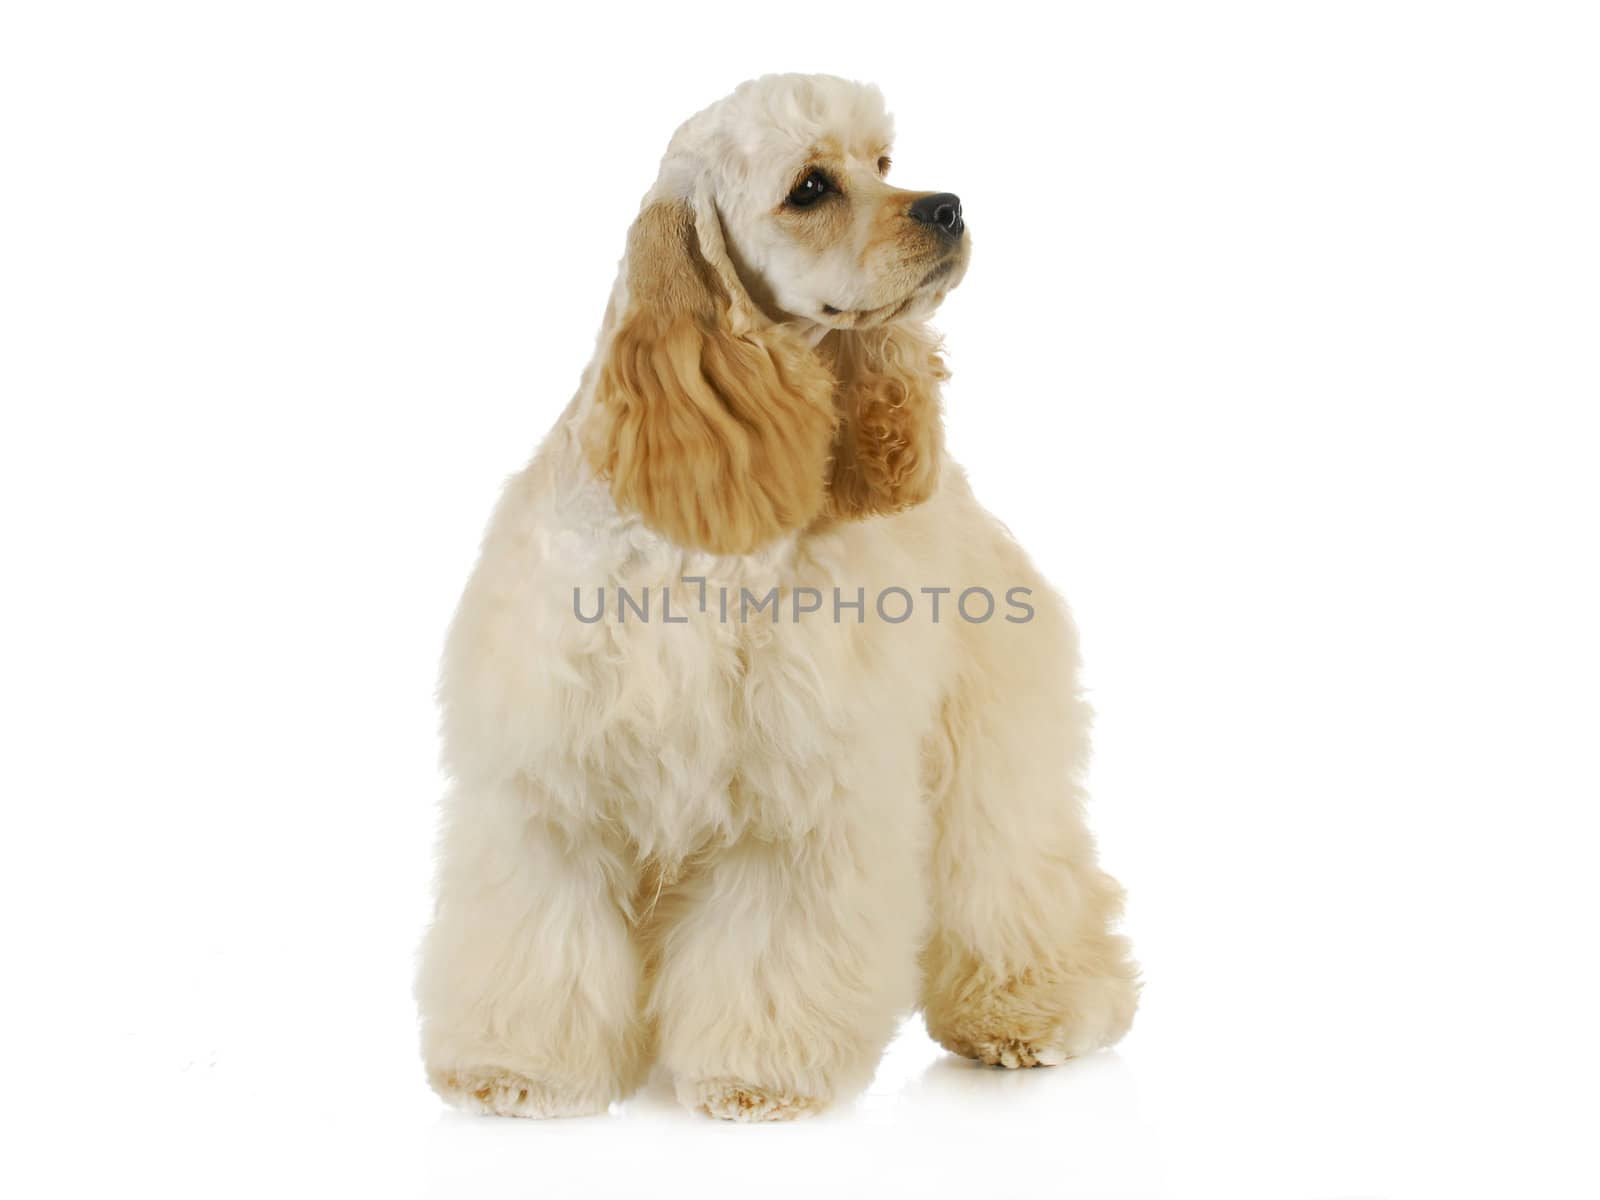 cute puppy - american cocker spaniel puppy standing on white background - 6 months old